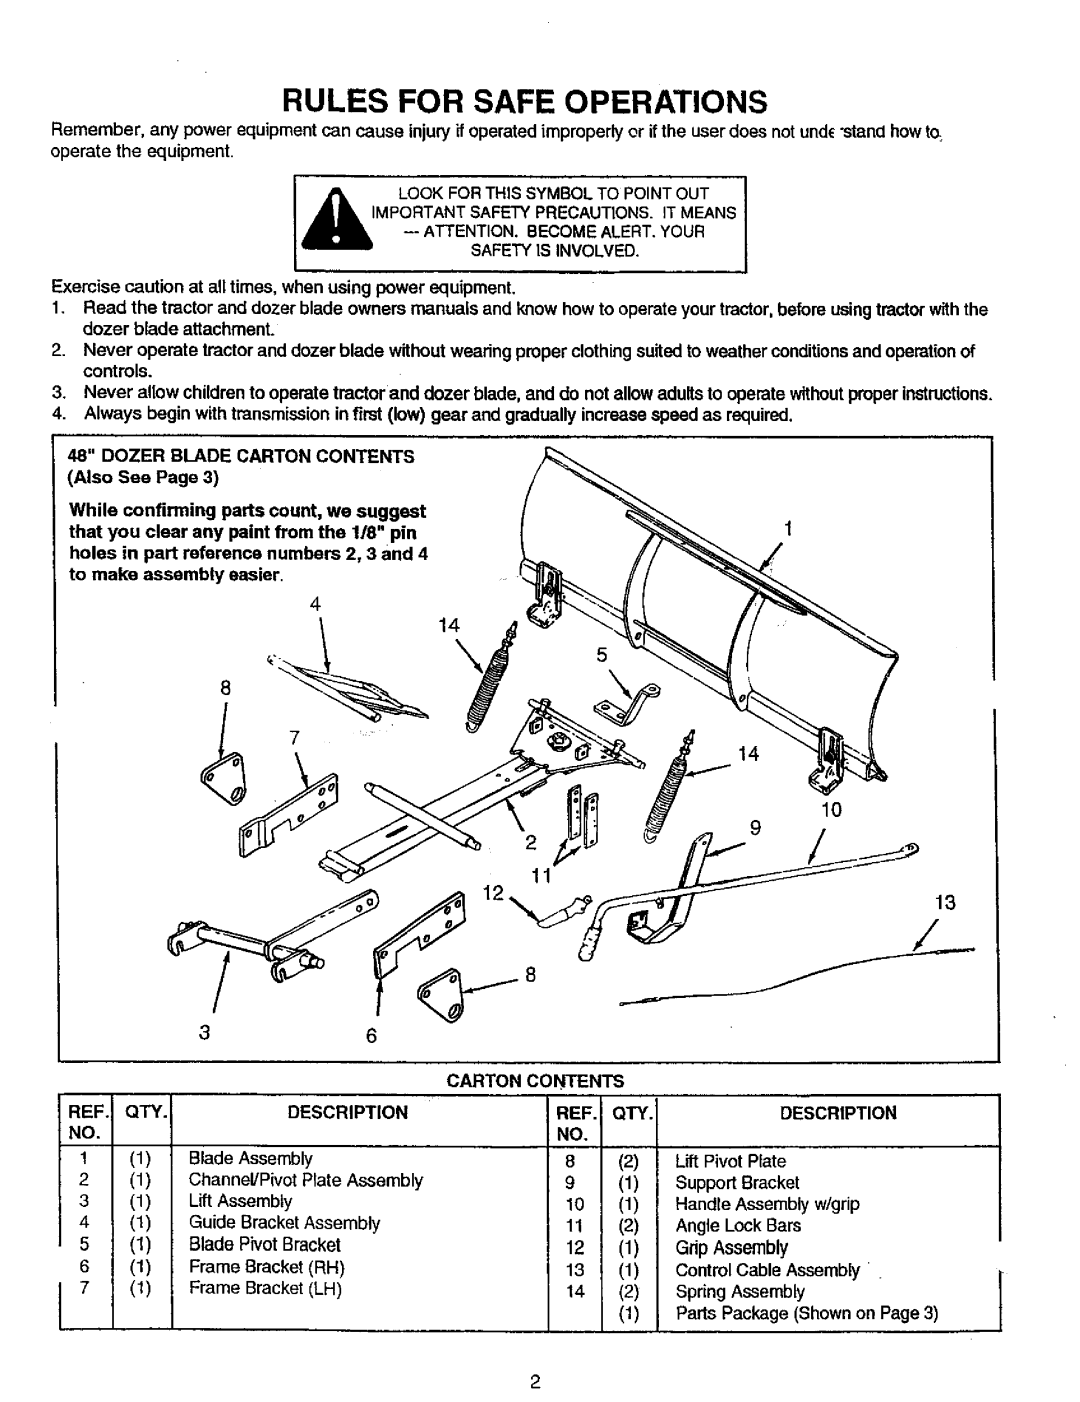 Sears 486.24412 owner manual Rules For Safe Operations 